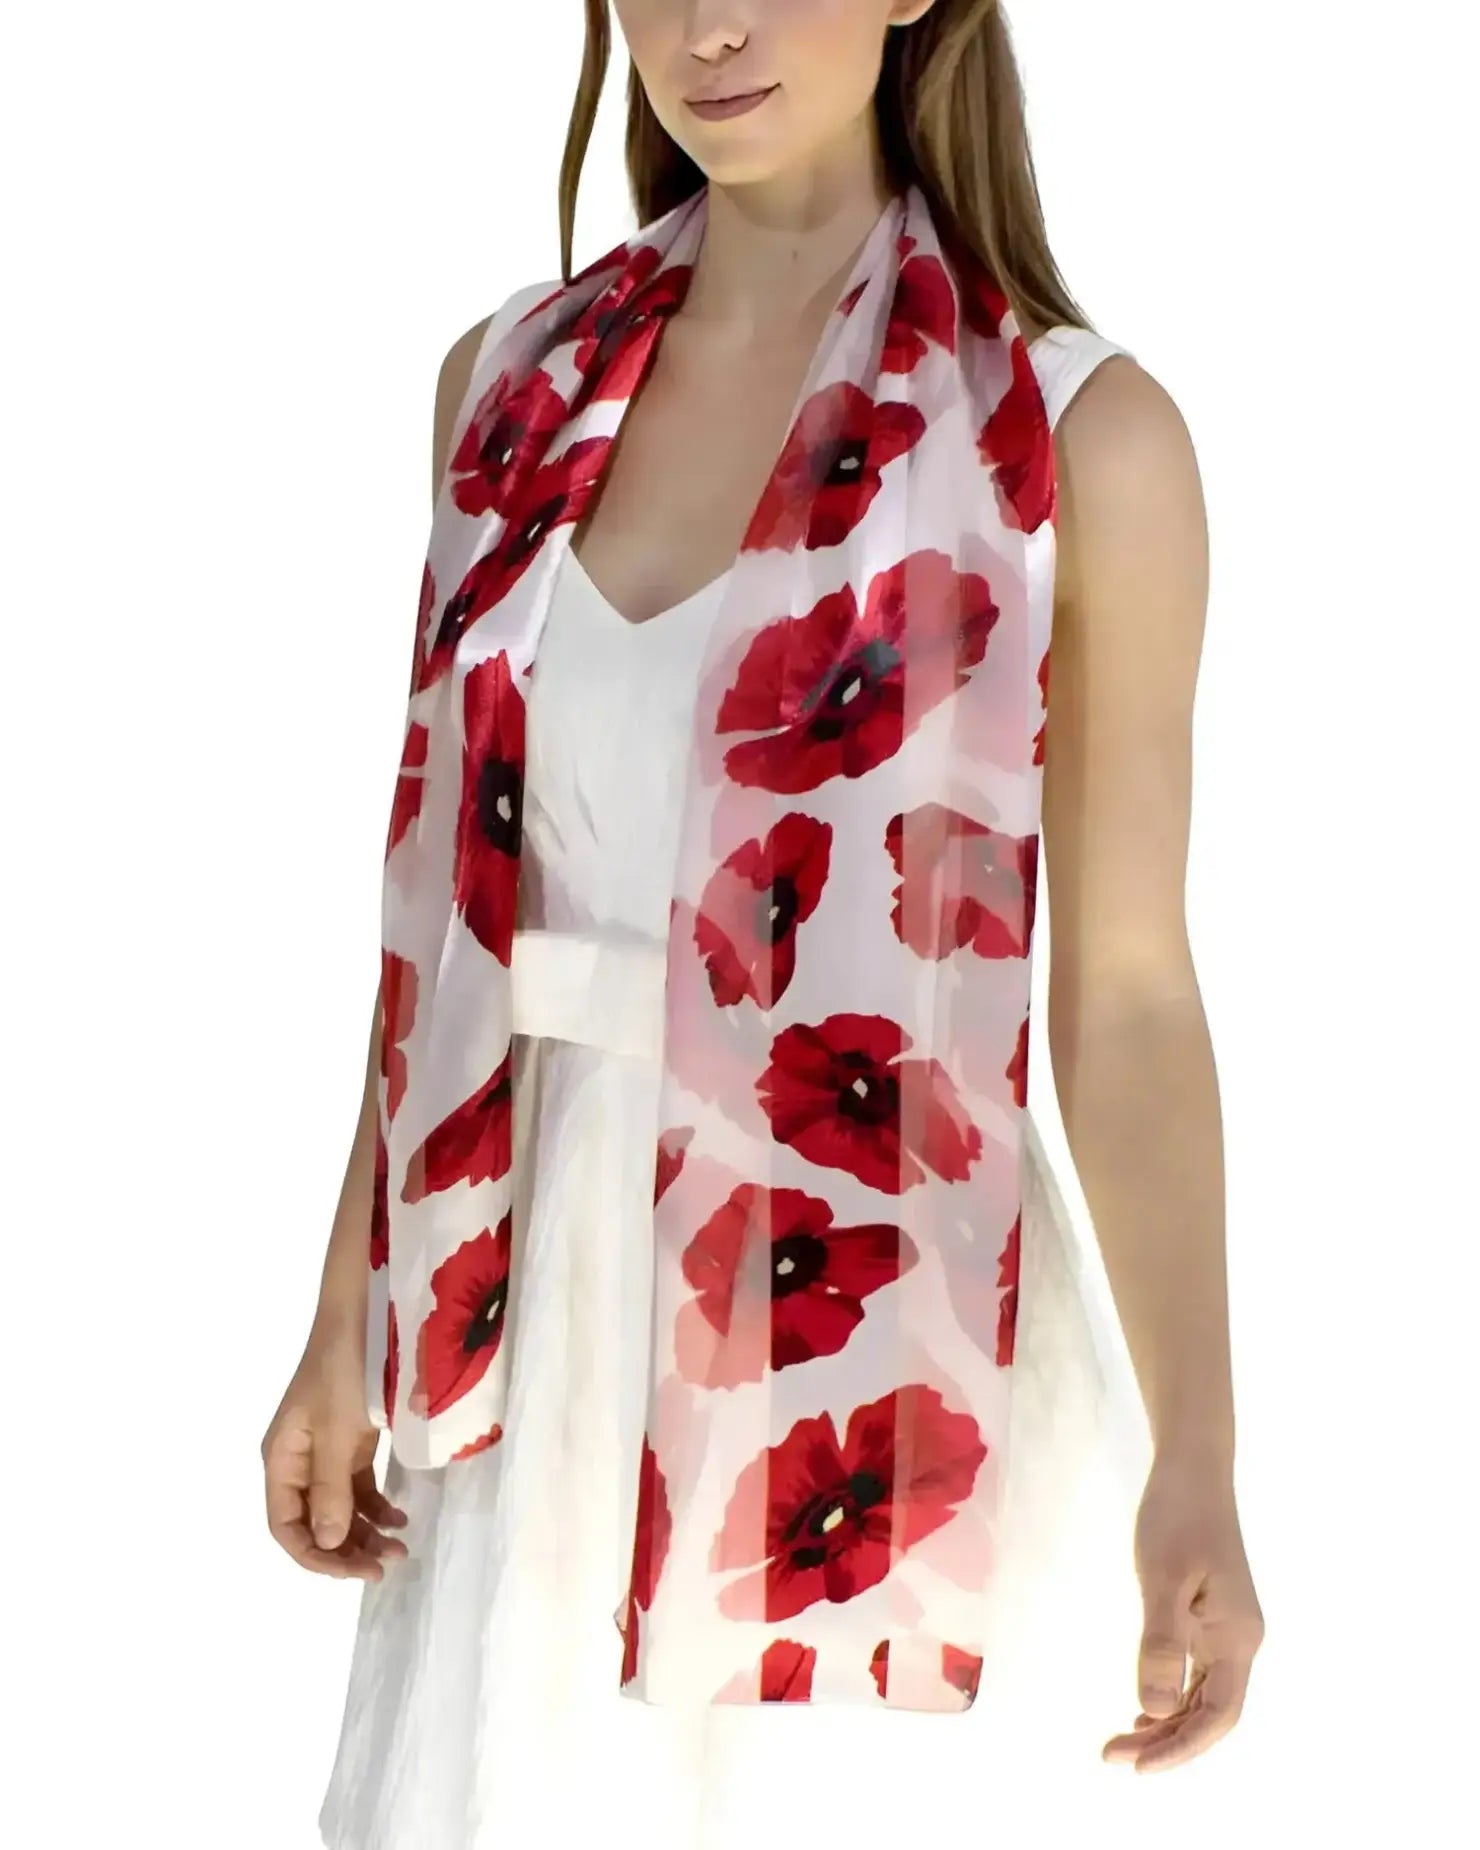 Woman in white dress with red flowers wearing Poppy Floral Print Scarf & Gold Plated Ring Set.